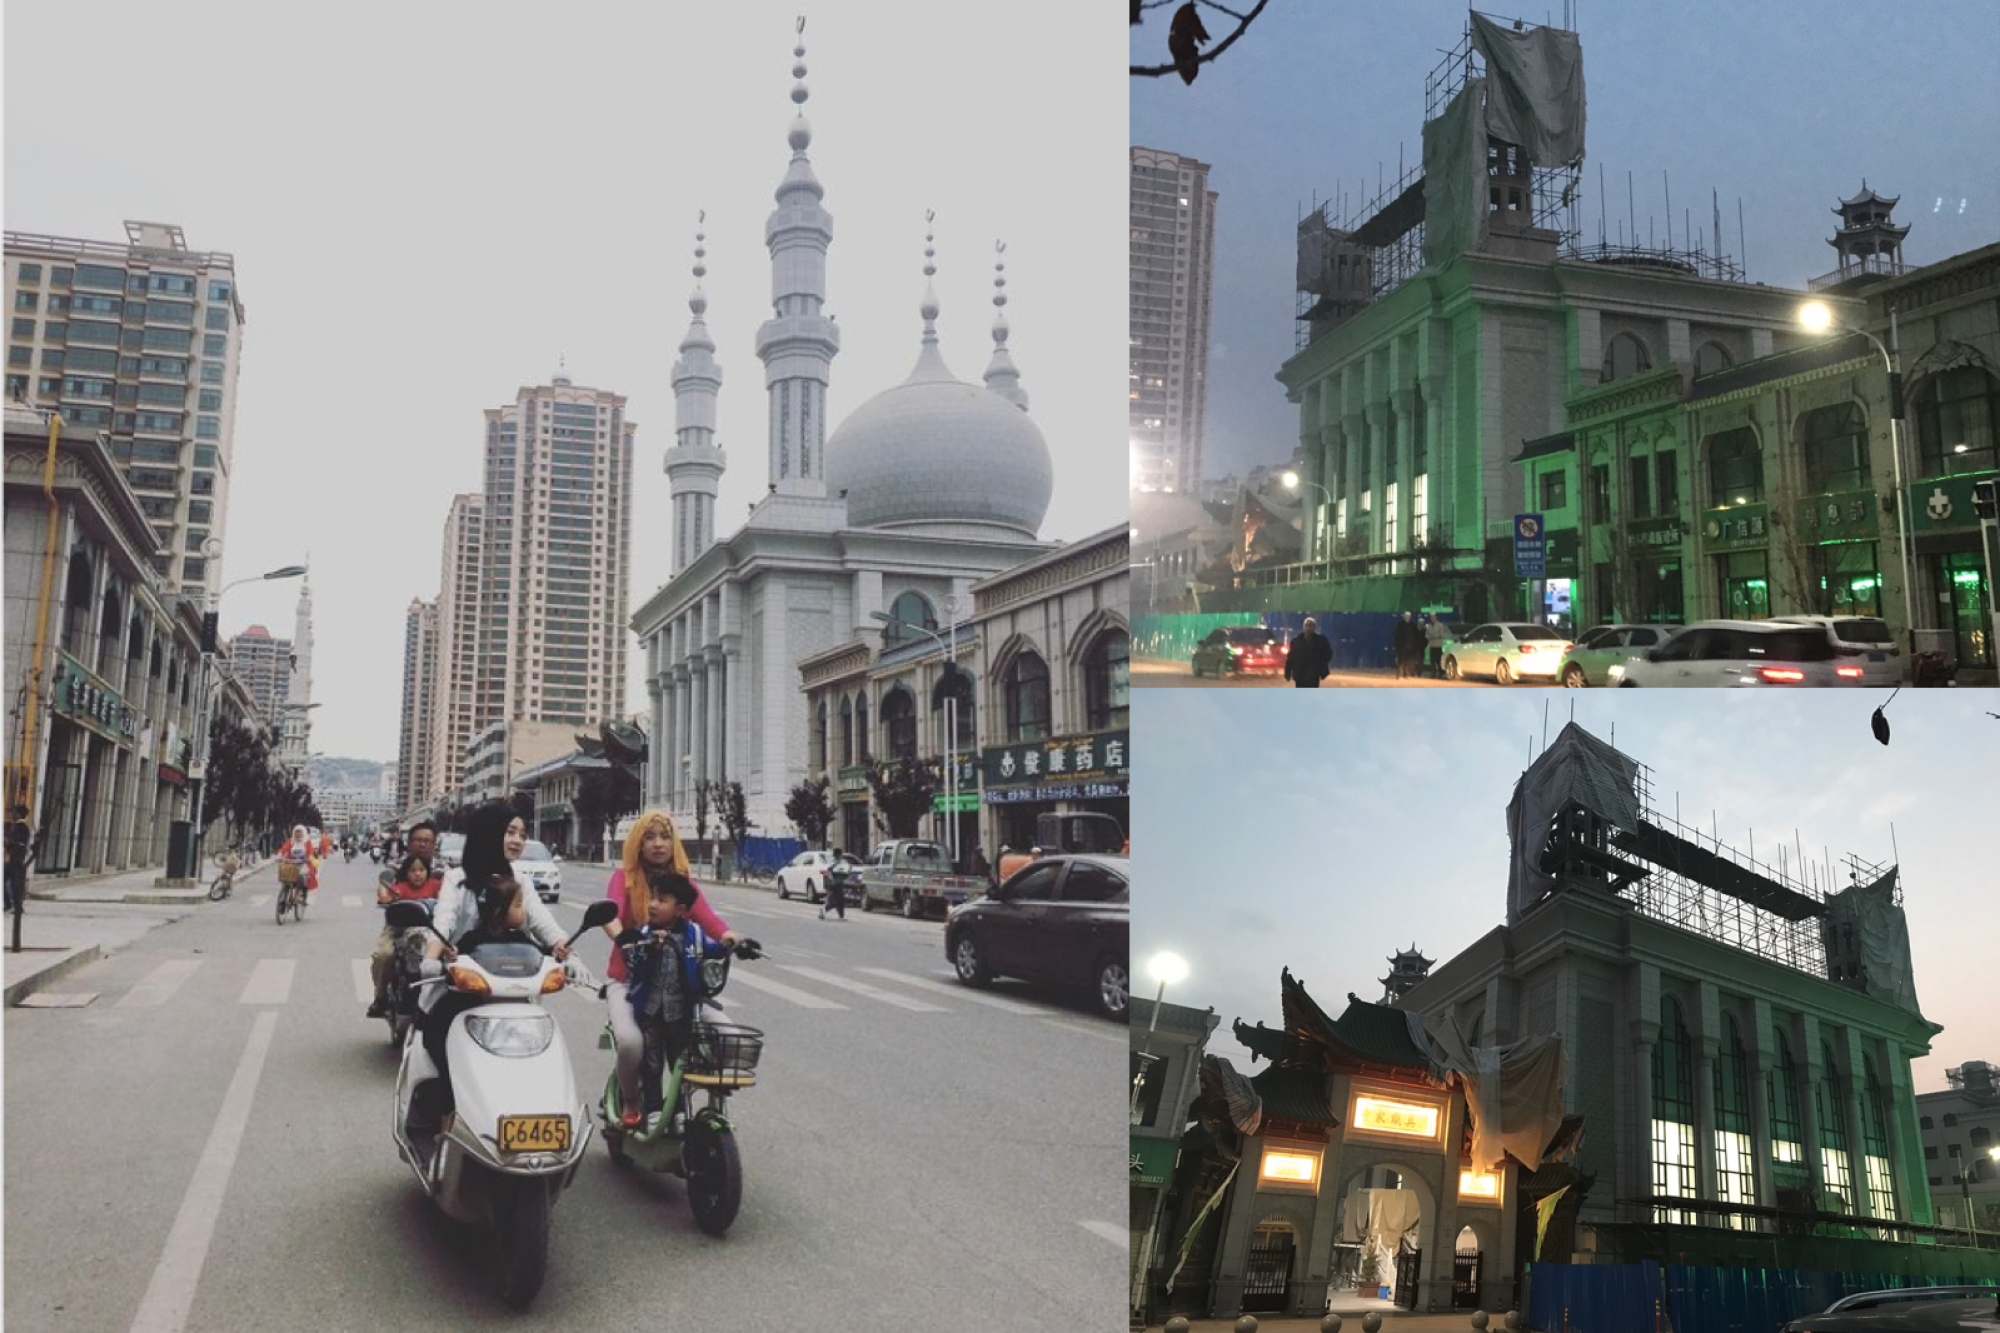 The Tiejia mosque in Linxia, Gansu province, China, in 2016 (left) and on Nov. 13, 2020 (right).